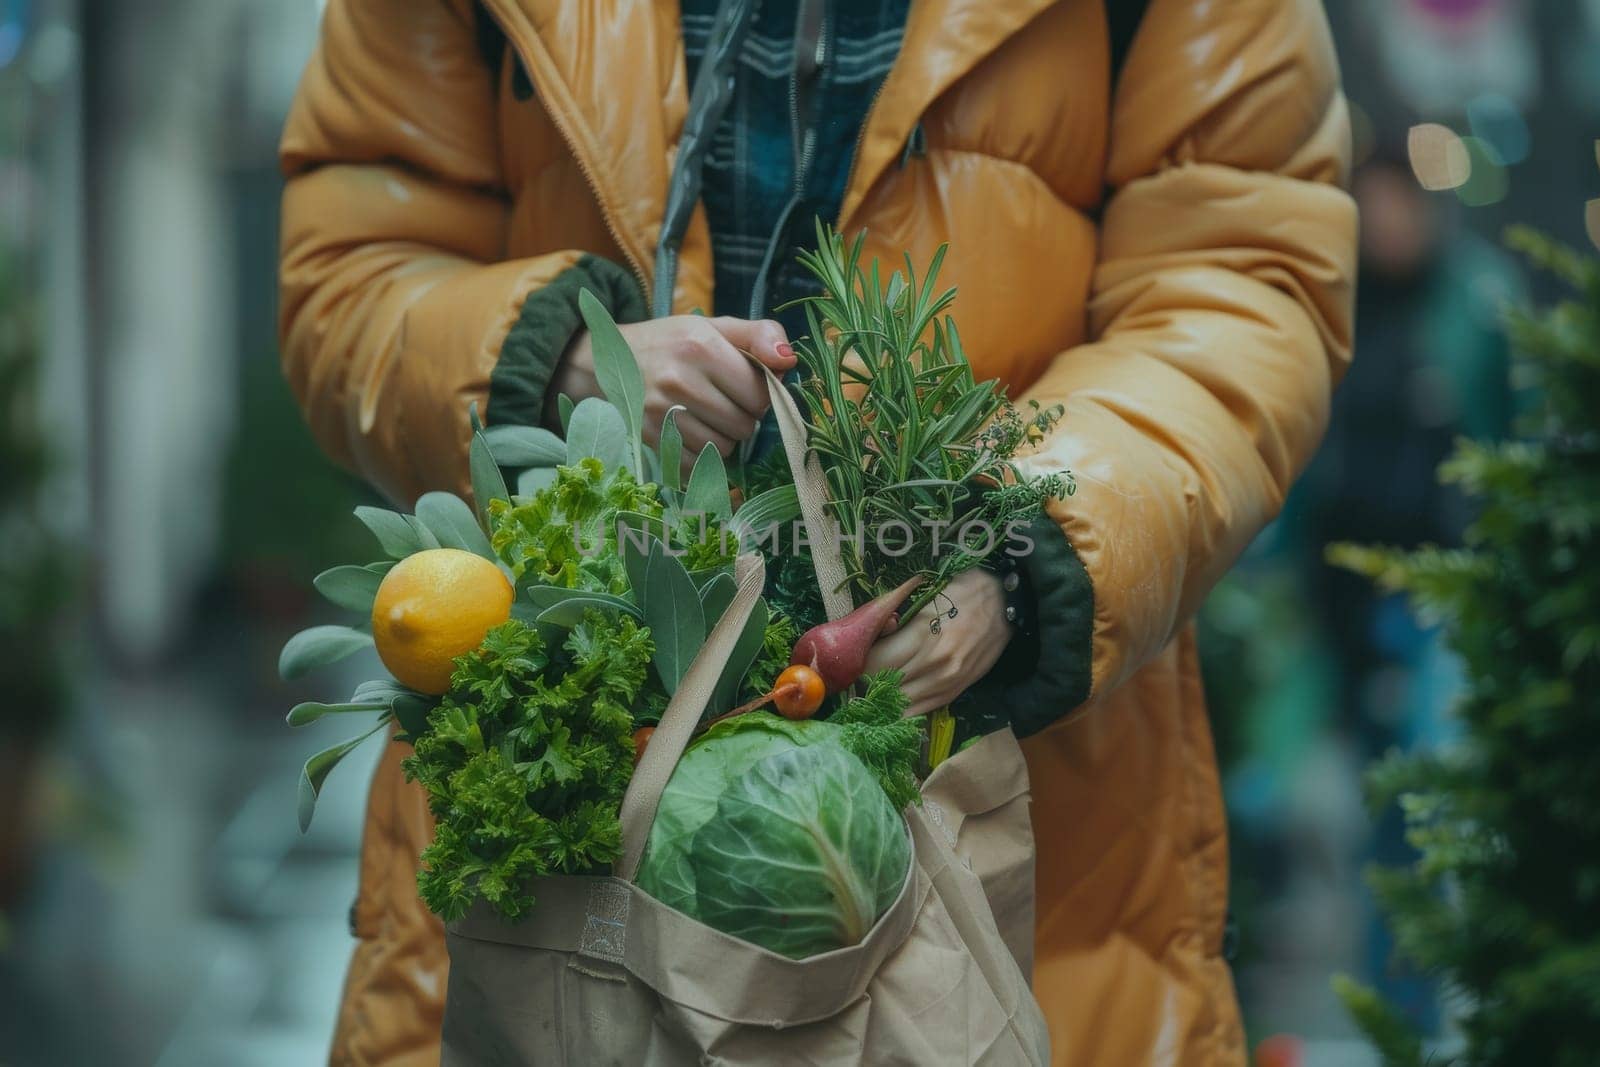 A person is holding a bag of vegetables, including carrots, broccoli, and celery by itchaznong